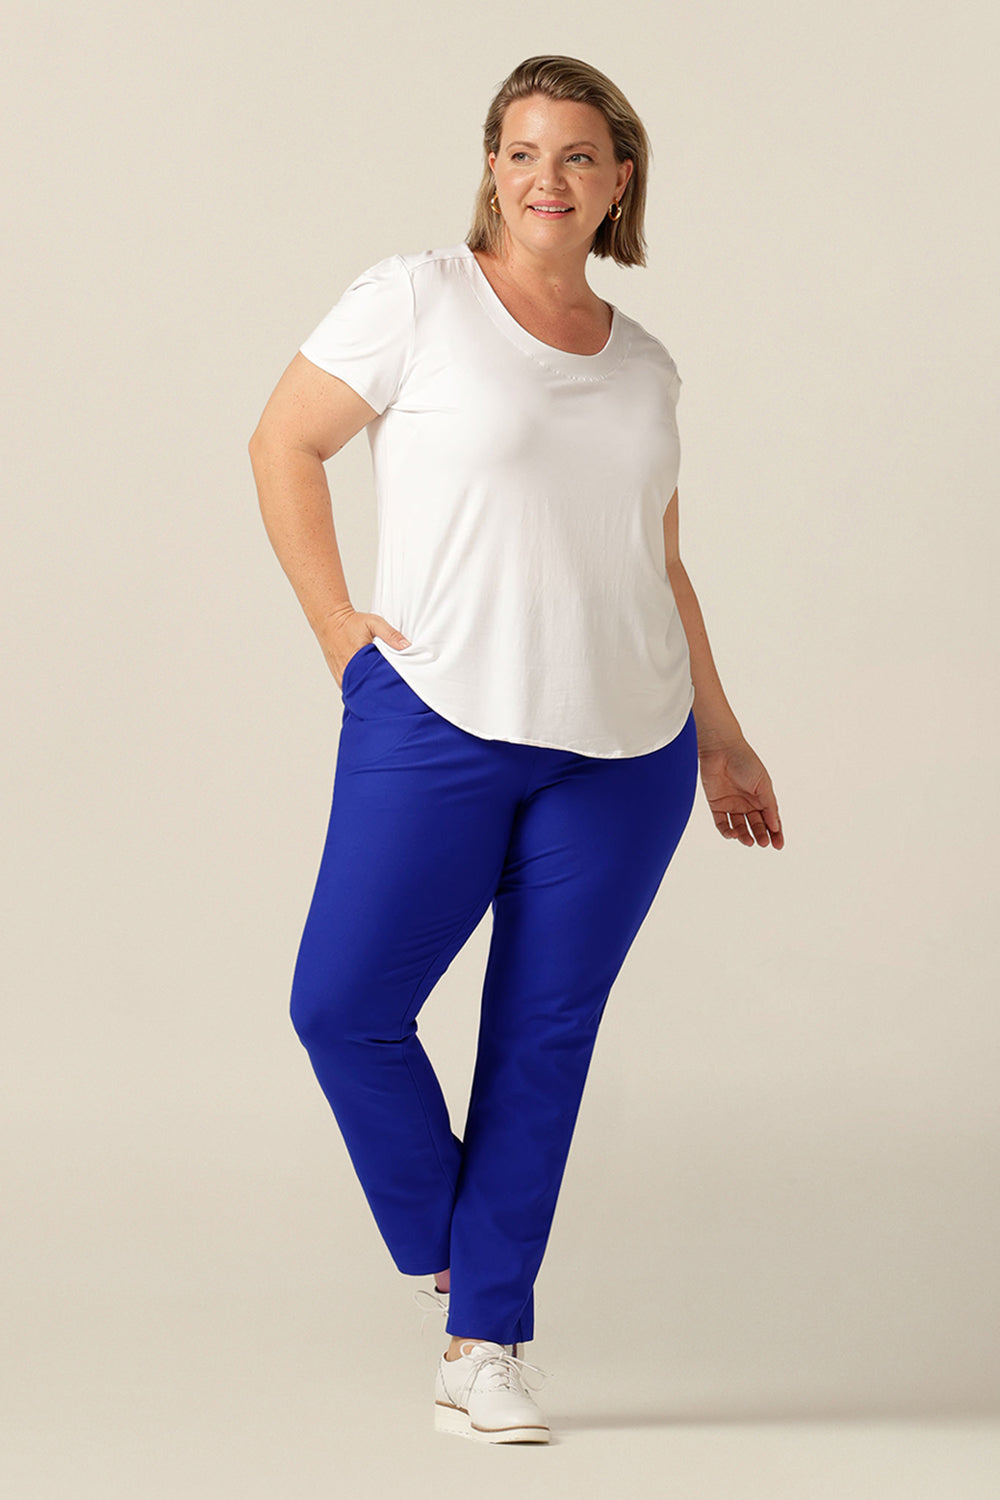 stretch-fabric, skinny leg work pant in with pockets and flat zip fastening